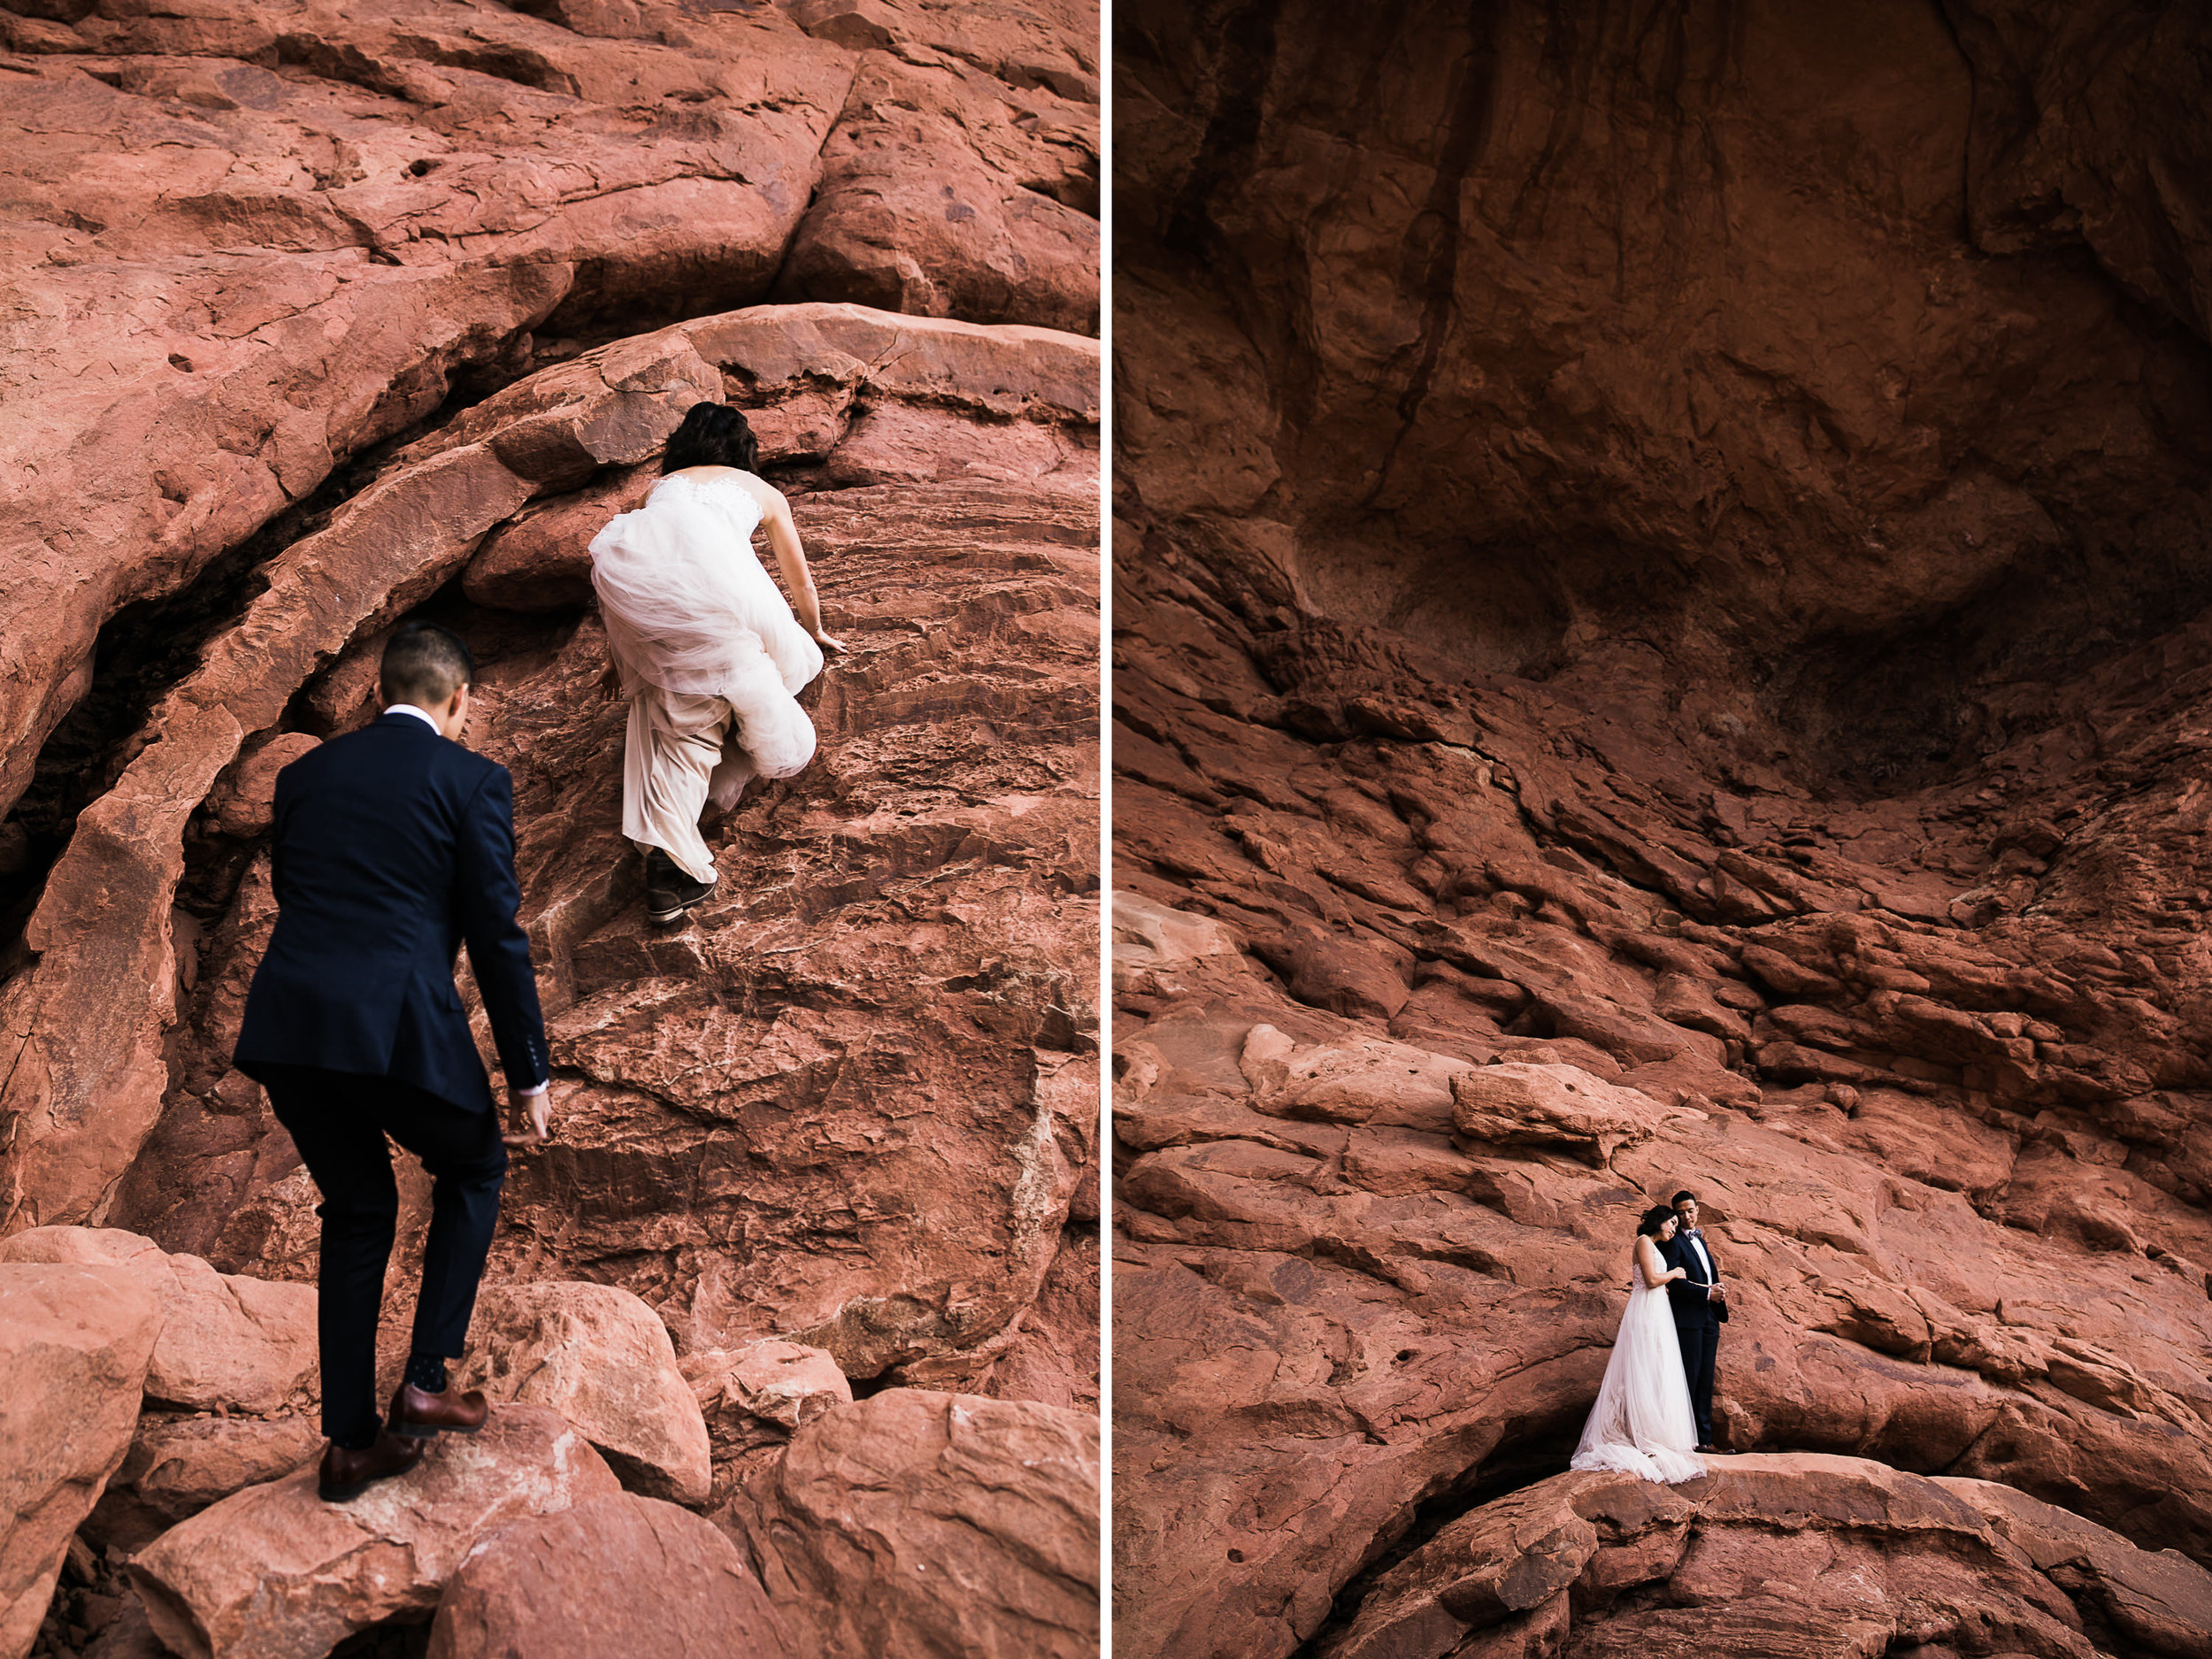 elopement first look in arches national park | desert elopement | moab wedding photographer | the hearnes adventure photography | www.thehearnes.com